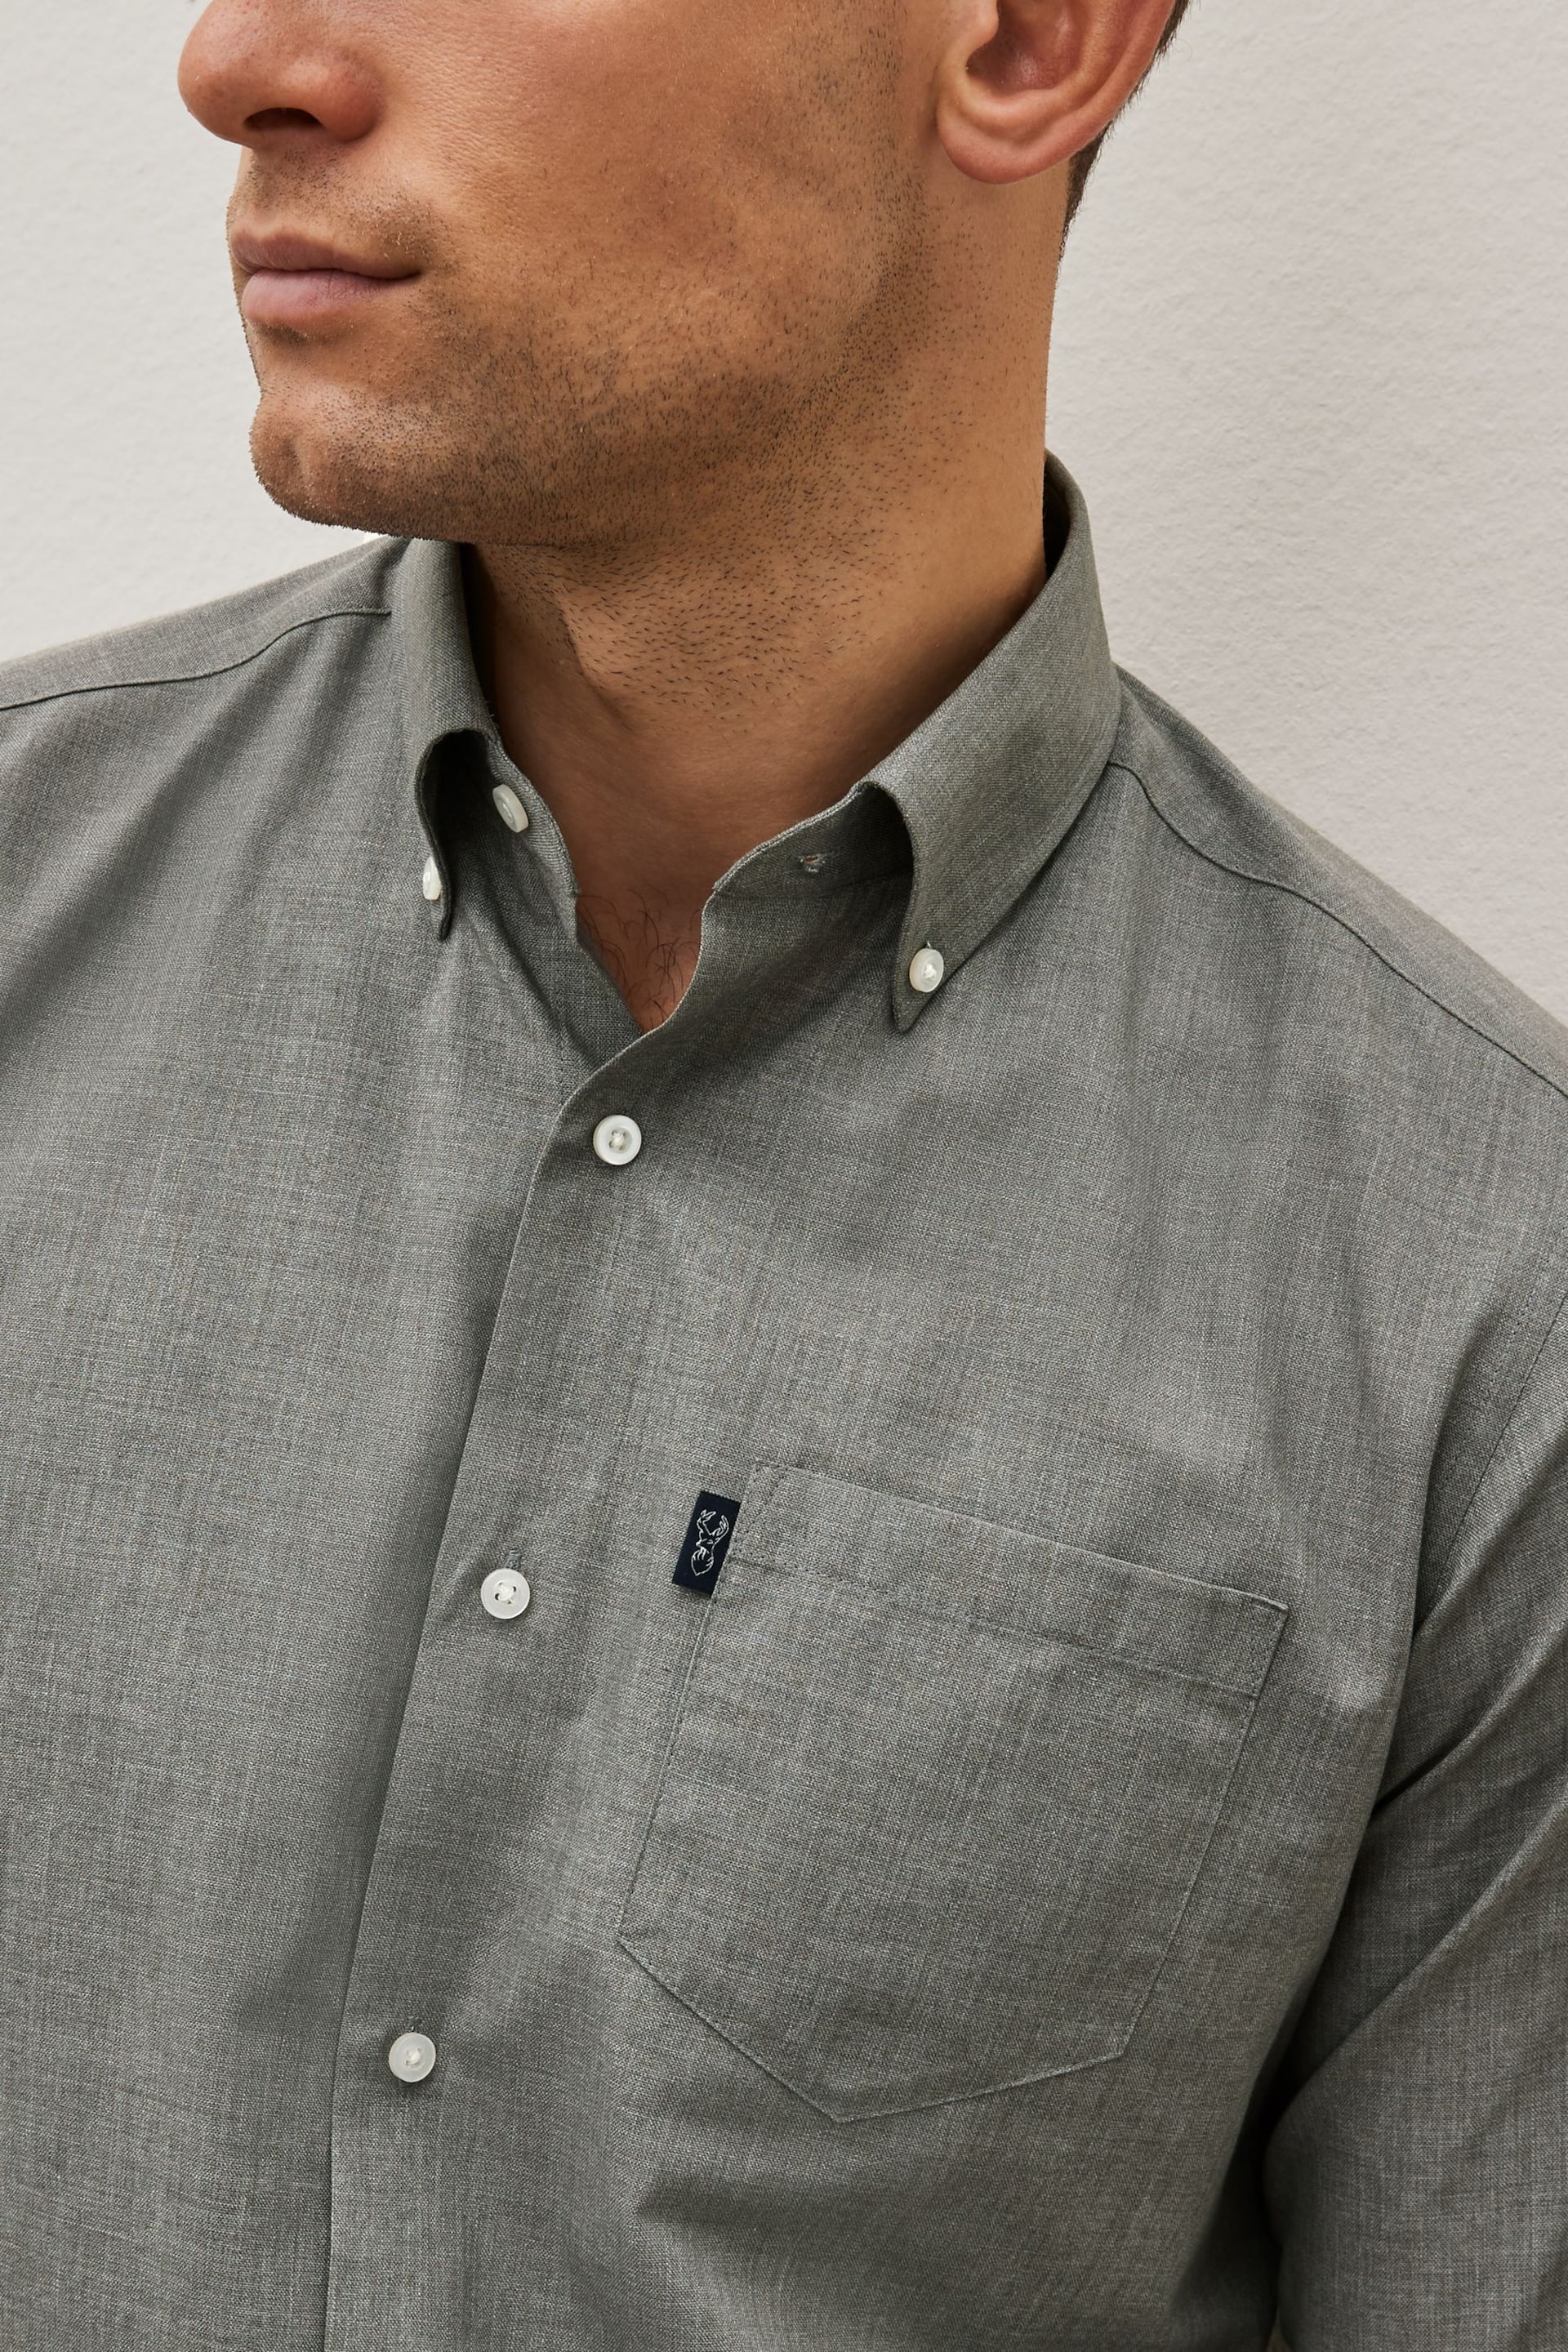 Grey Marl Regular Fit Easy Iron Button Down Oxford Shirt - Image 5 of 8